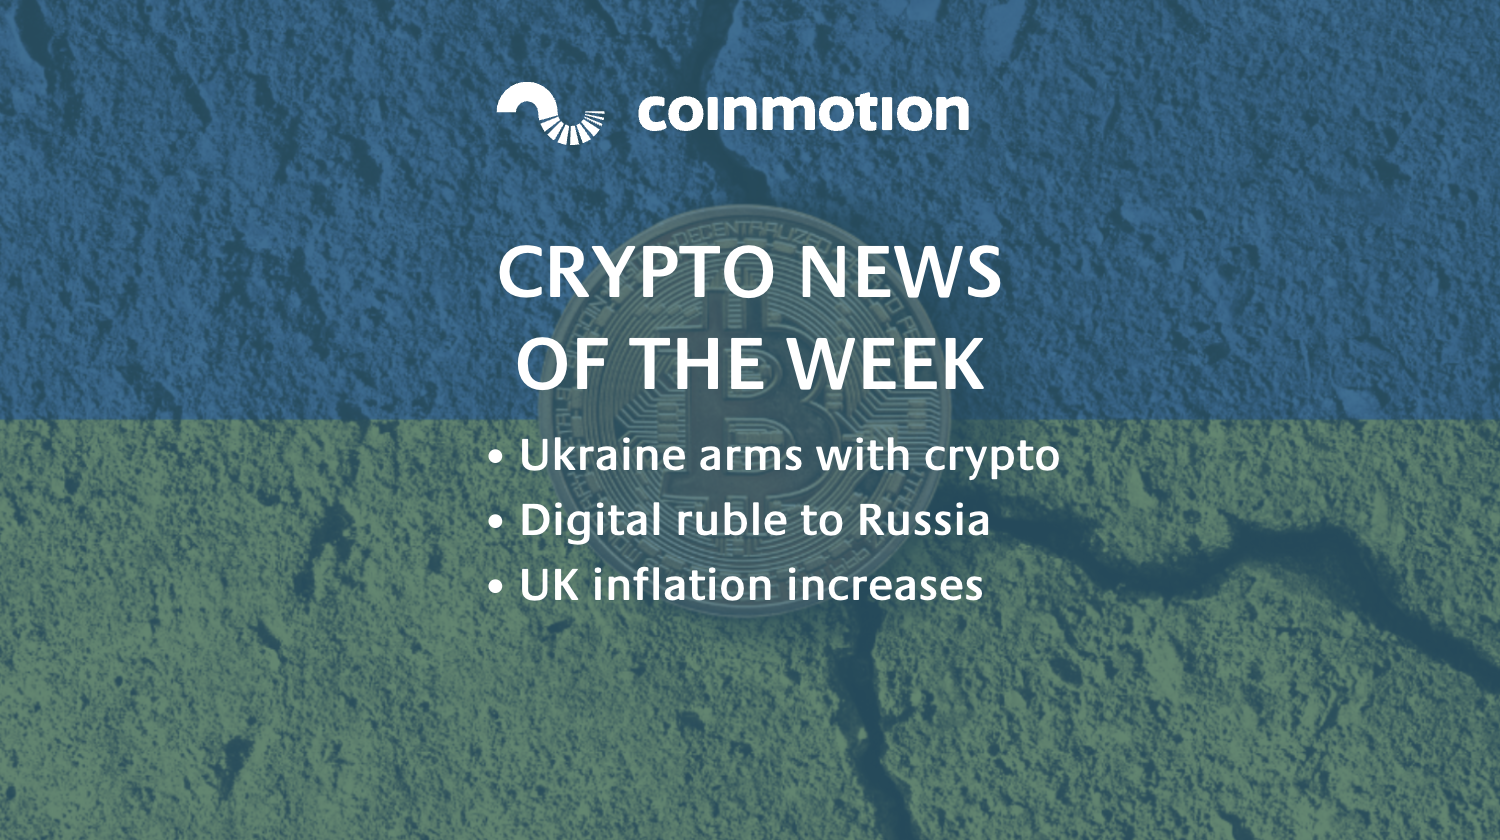 Ukraine arms with crypto, Scams on the decline, digital ruble to Russia